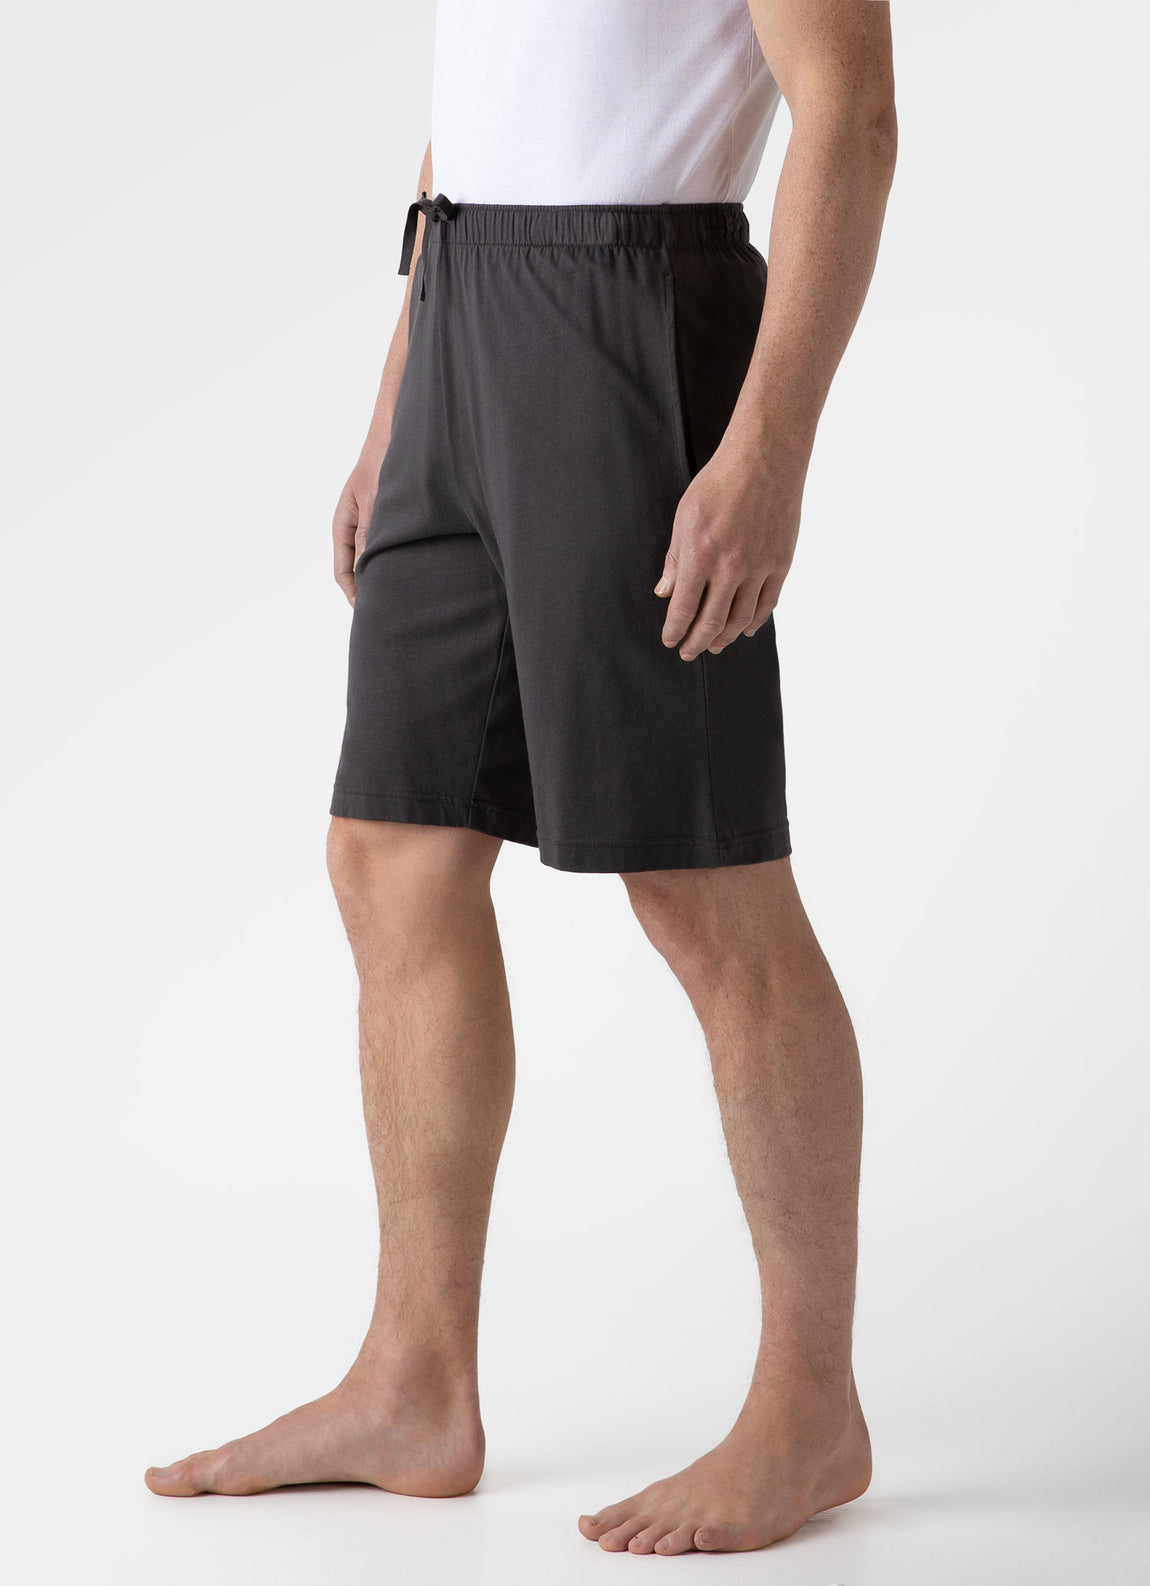 Men's Cotton Modal Lounge Shorts in Charcoal